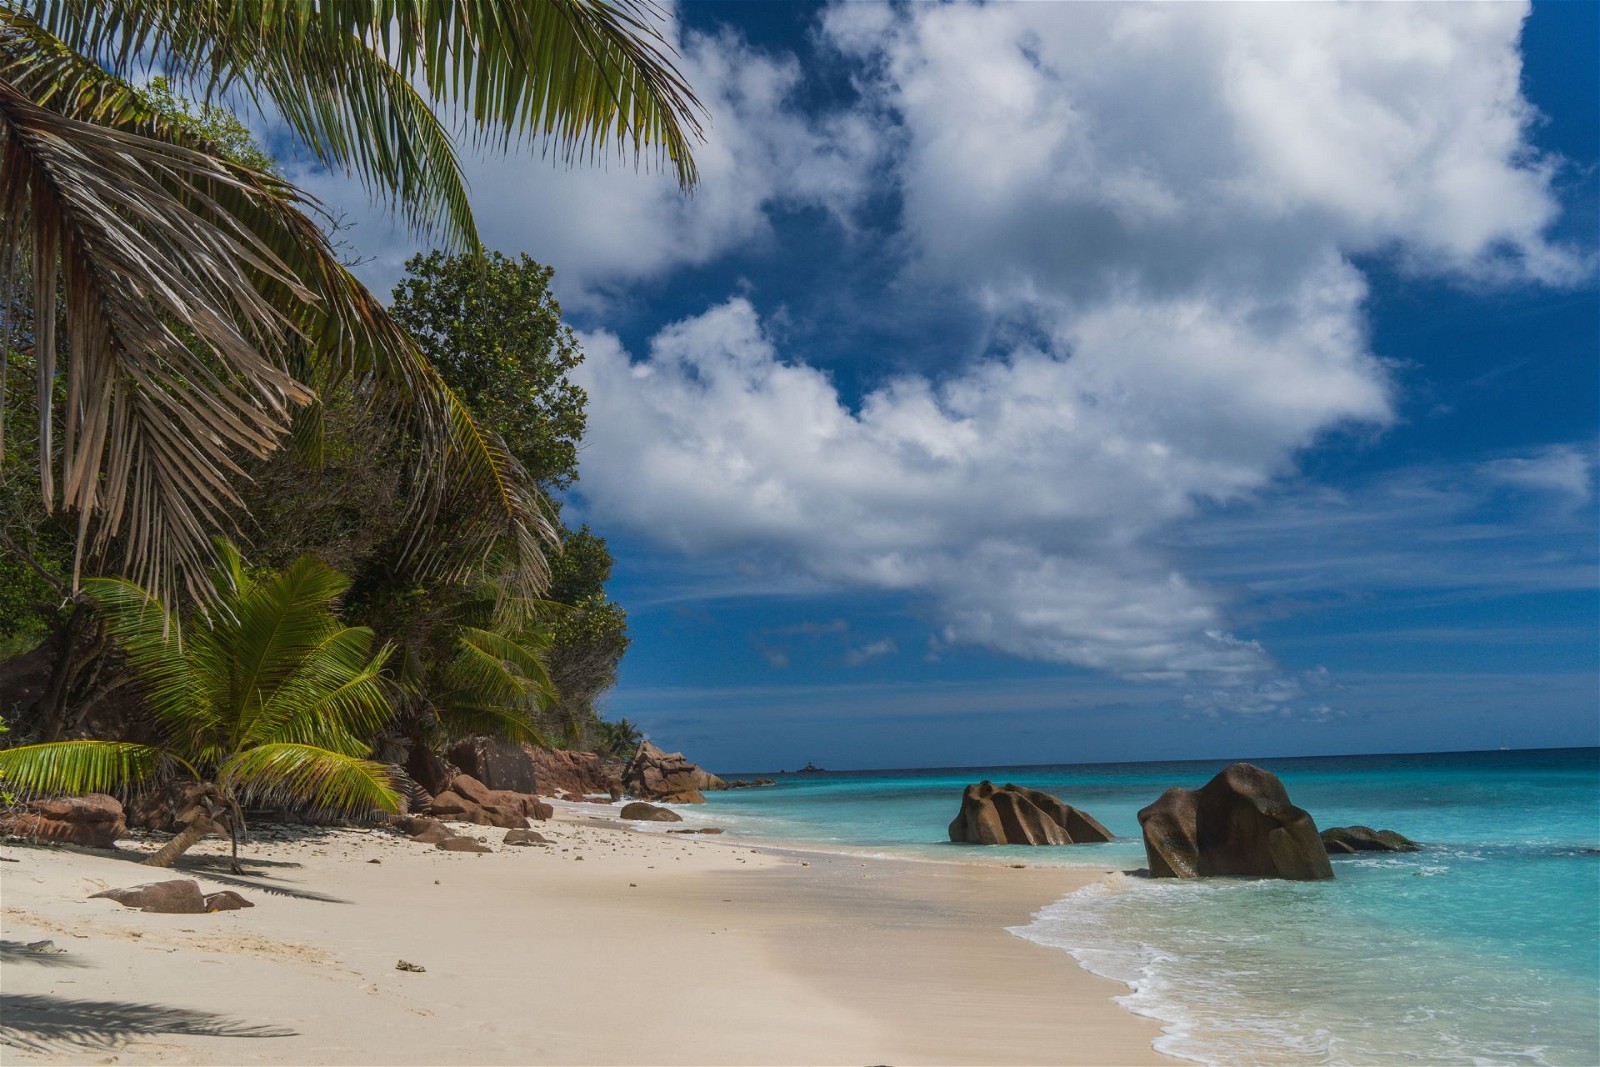 Accommodation options in Seychelles are available in a wide range that caters to every budget. 